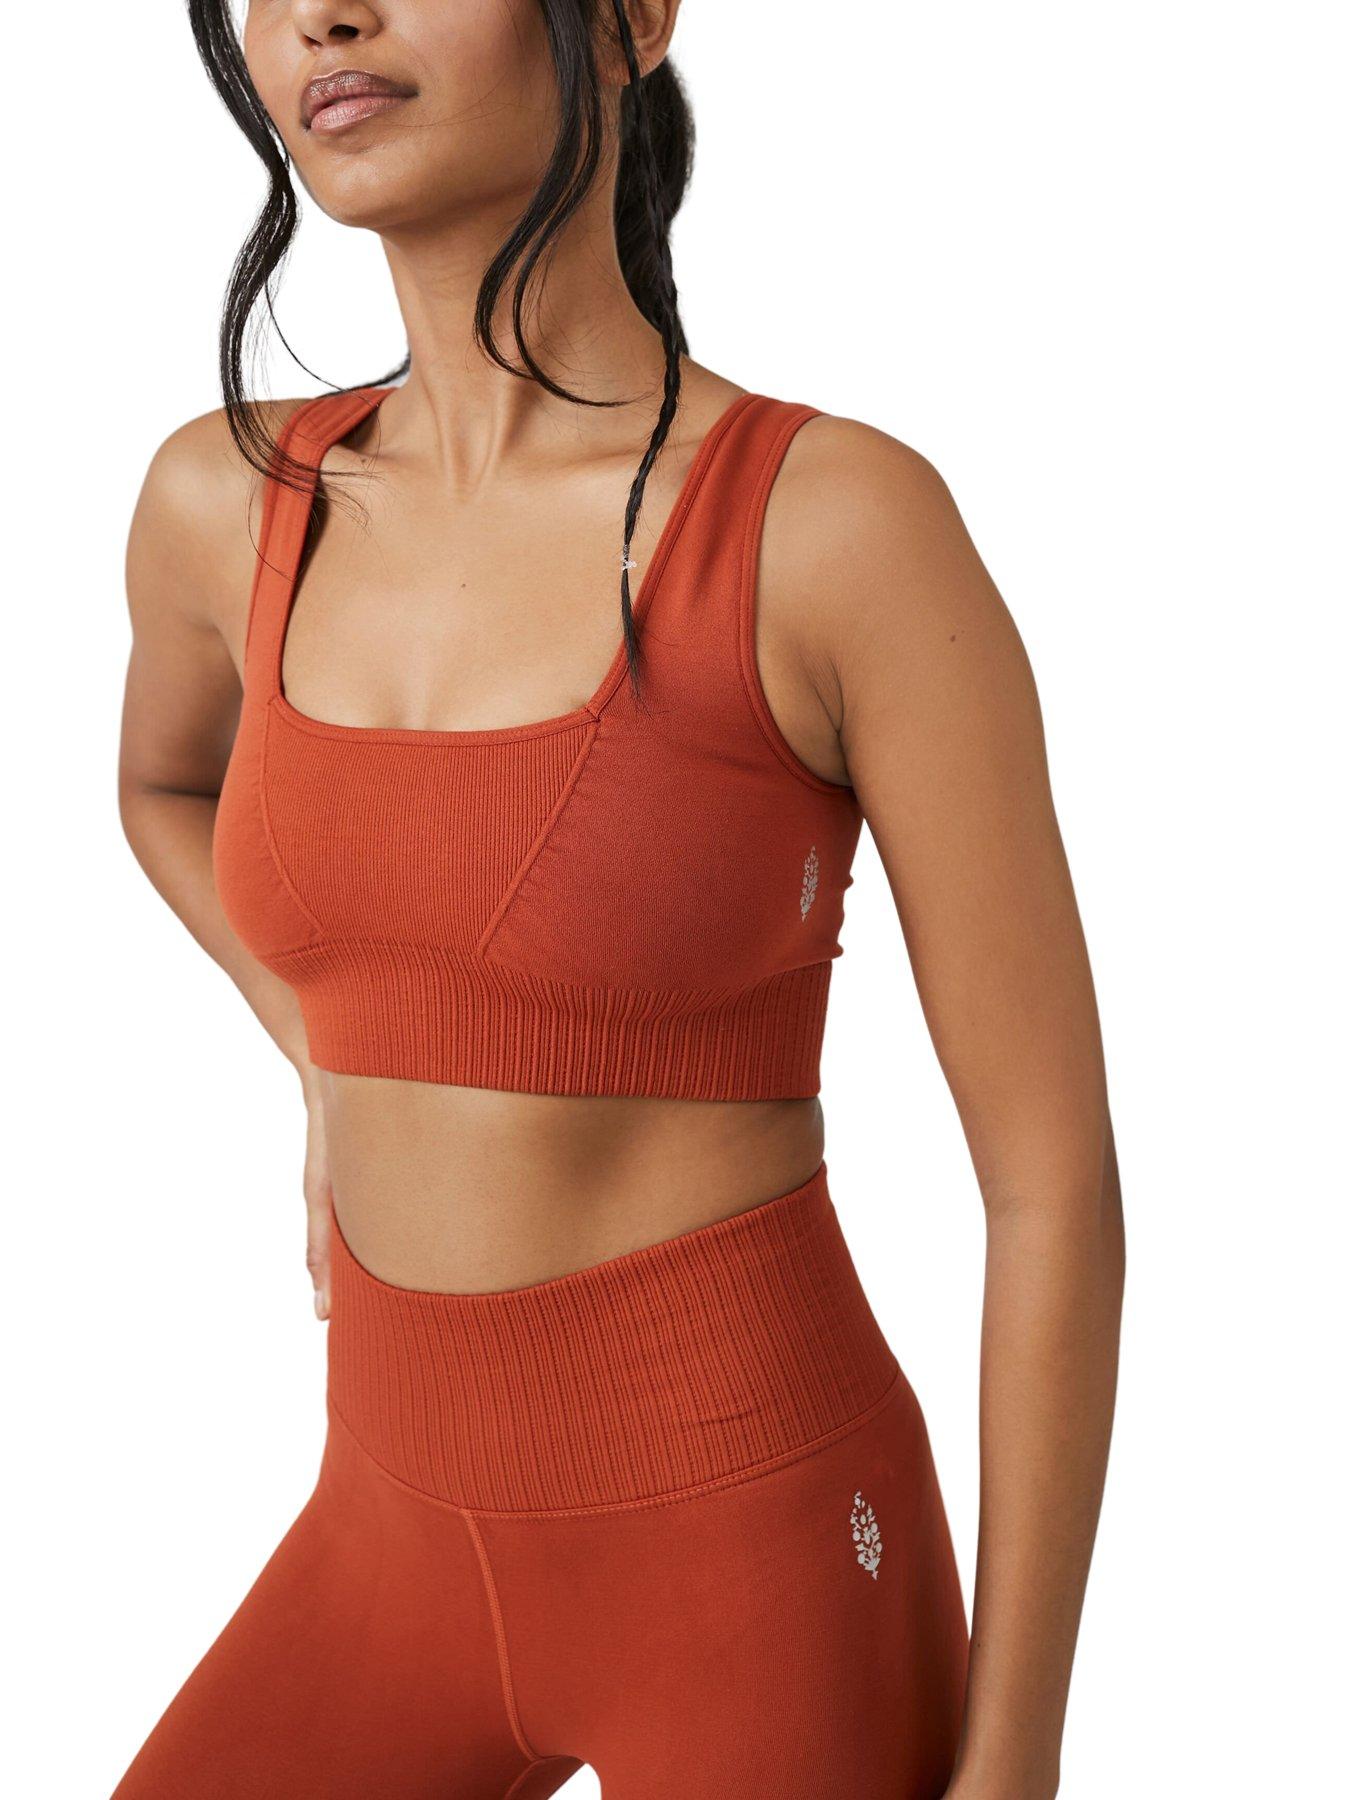 Free People Movement Good Karma Cut Out Sports Bra Top, All Colors $48 |  FF-211